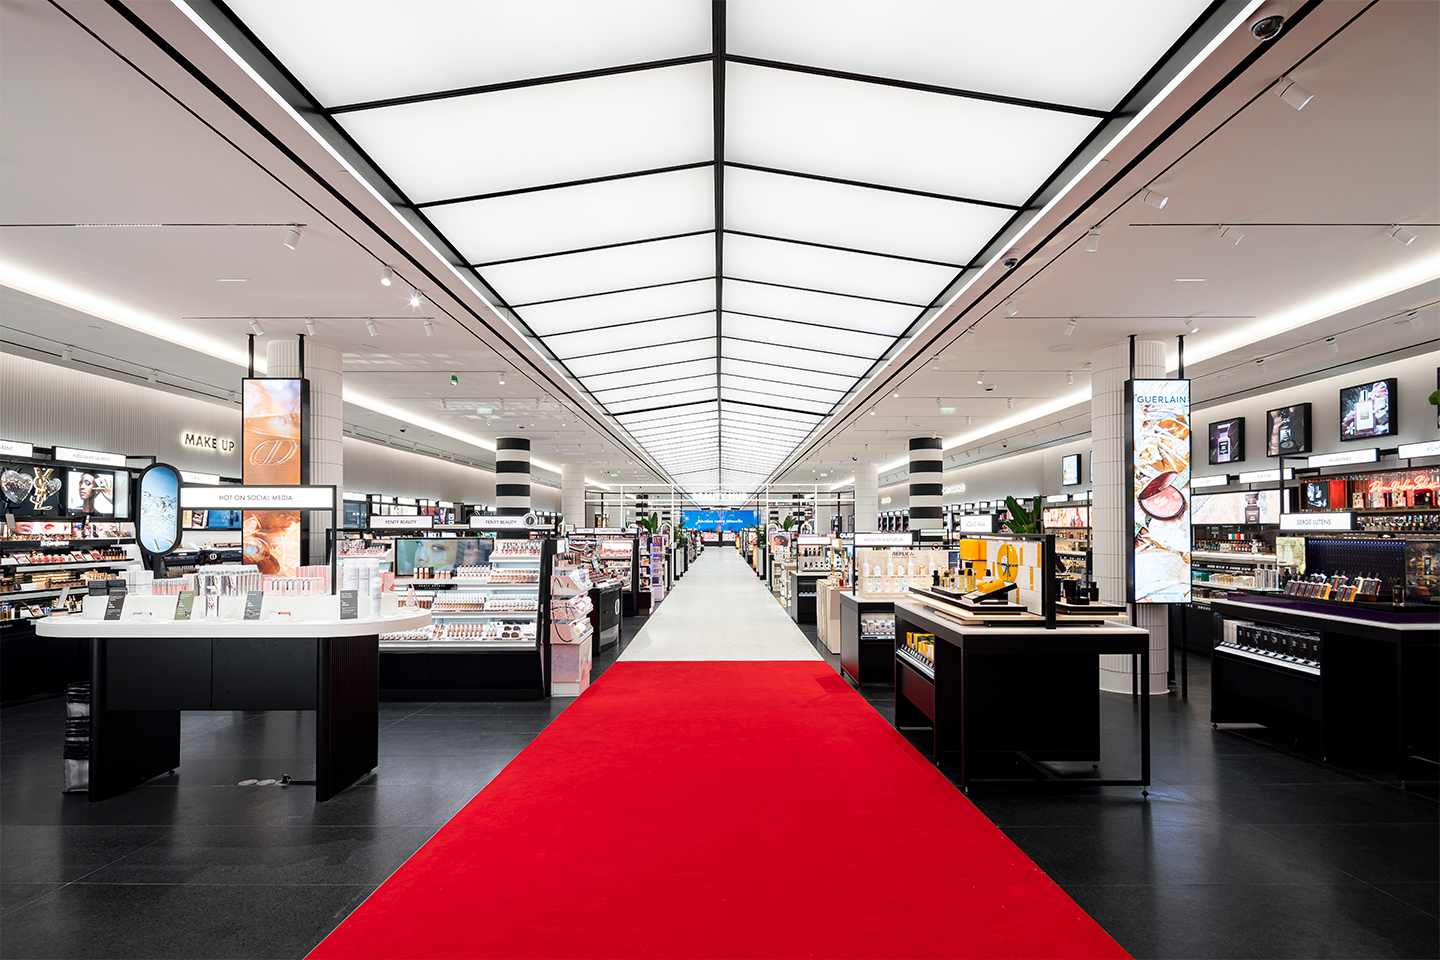 Sephora Champs-Élysées didn't simply unveil a red carpet; they curated an entrance that whisked visitors away to the Met Gala of beauty. Courtesy of Sephora